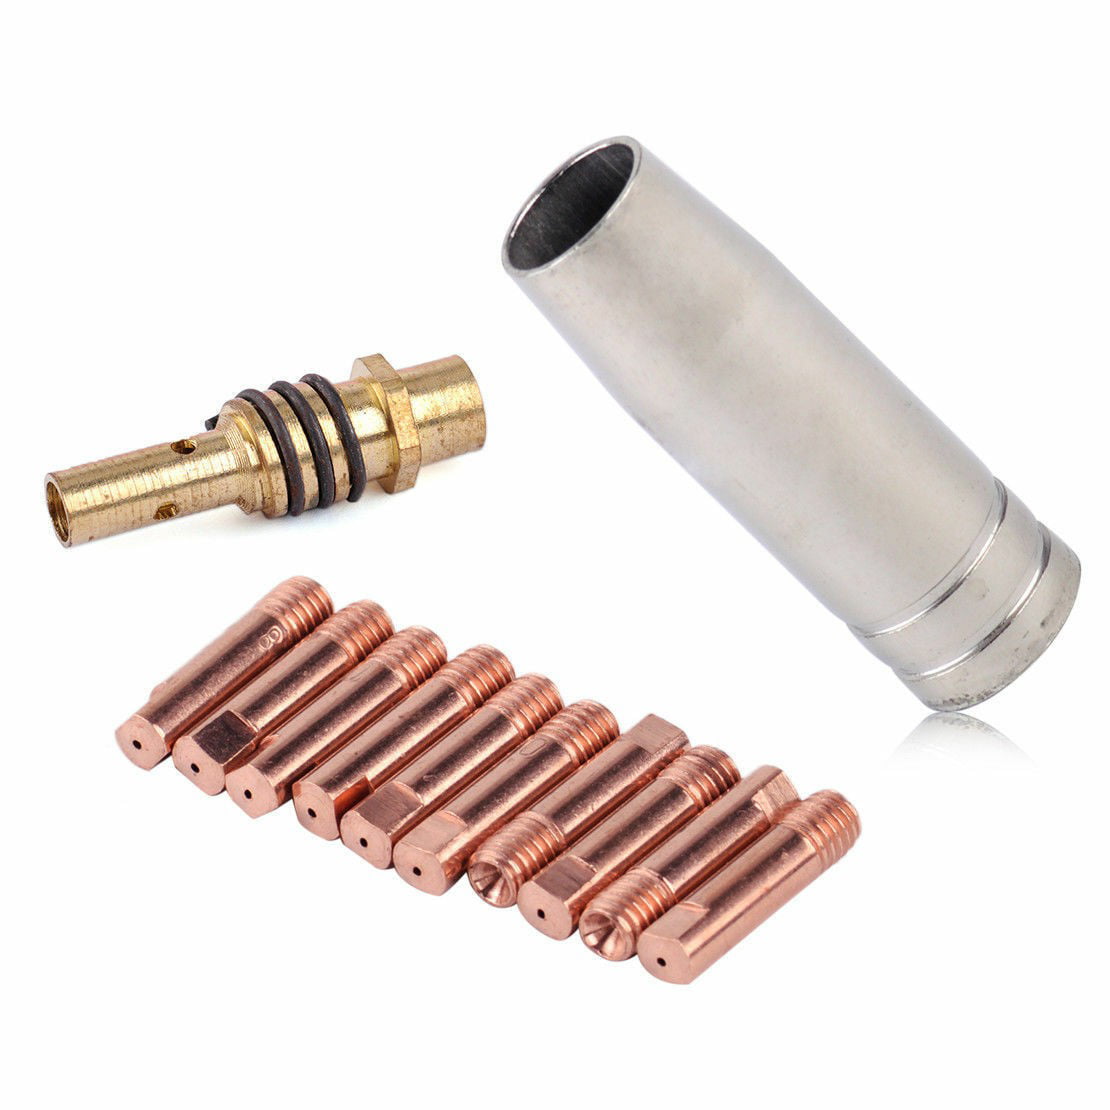 12Pcs-MB15 MIG/MAG Welding Nozzle Shroud Contact Tips 0.8mm-M6 Tip Holder Kit 